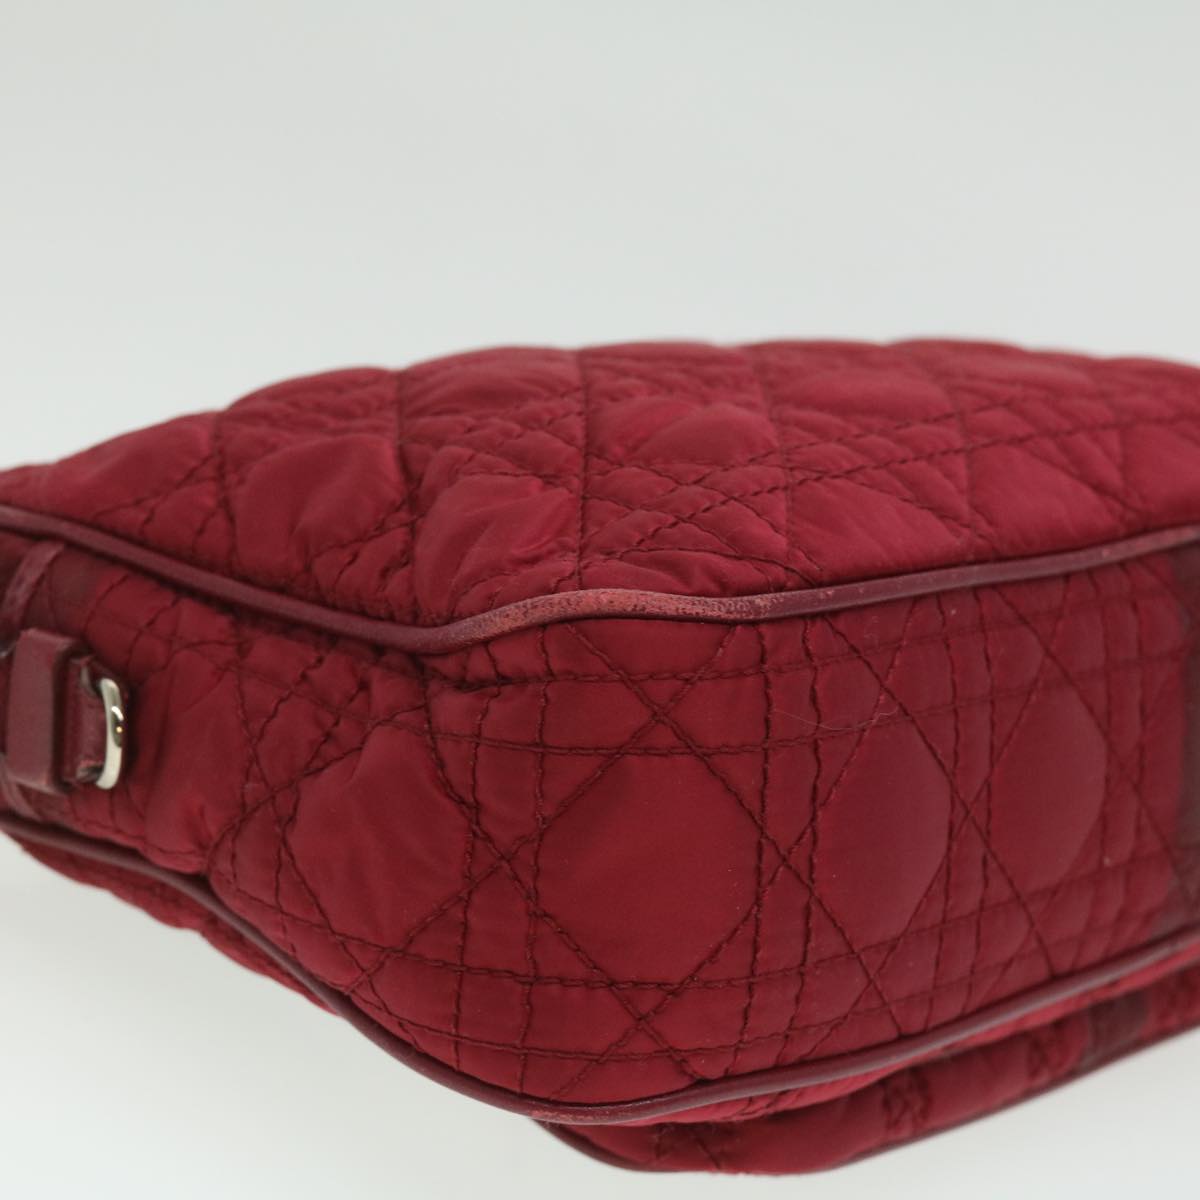 Christian Dior Lady Dior Canage Shoulder Bag Nylon outlet Red Auth bs3570